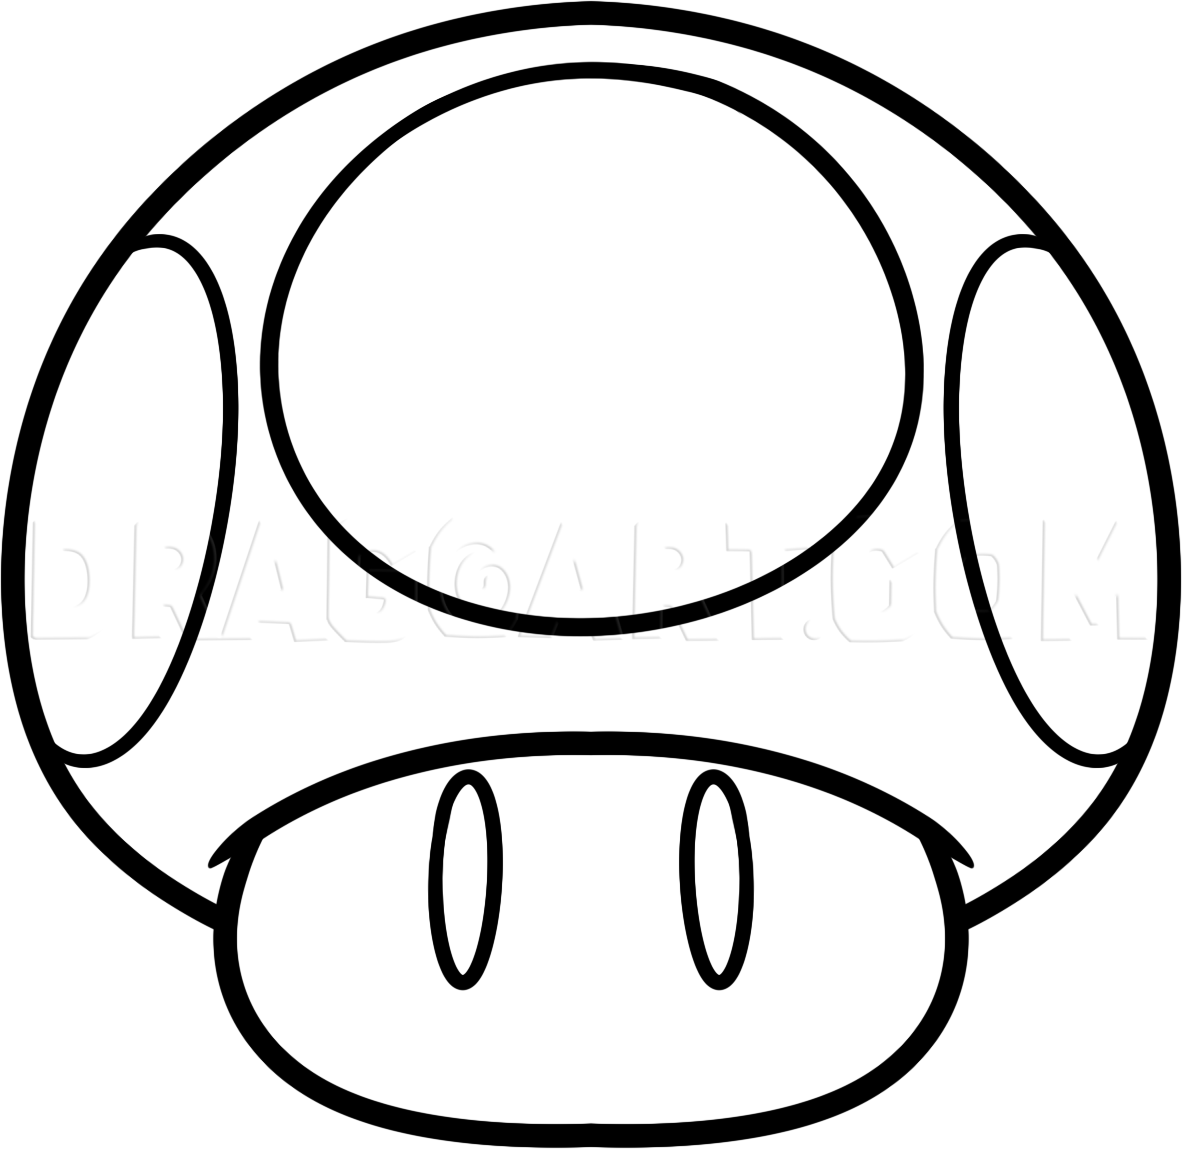 How to Draw the Mario Mushroom, Coloring Page, Trace Drawing